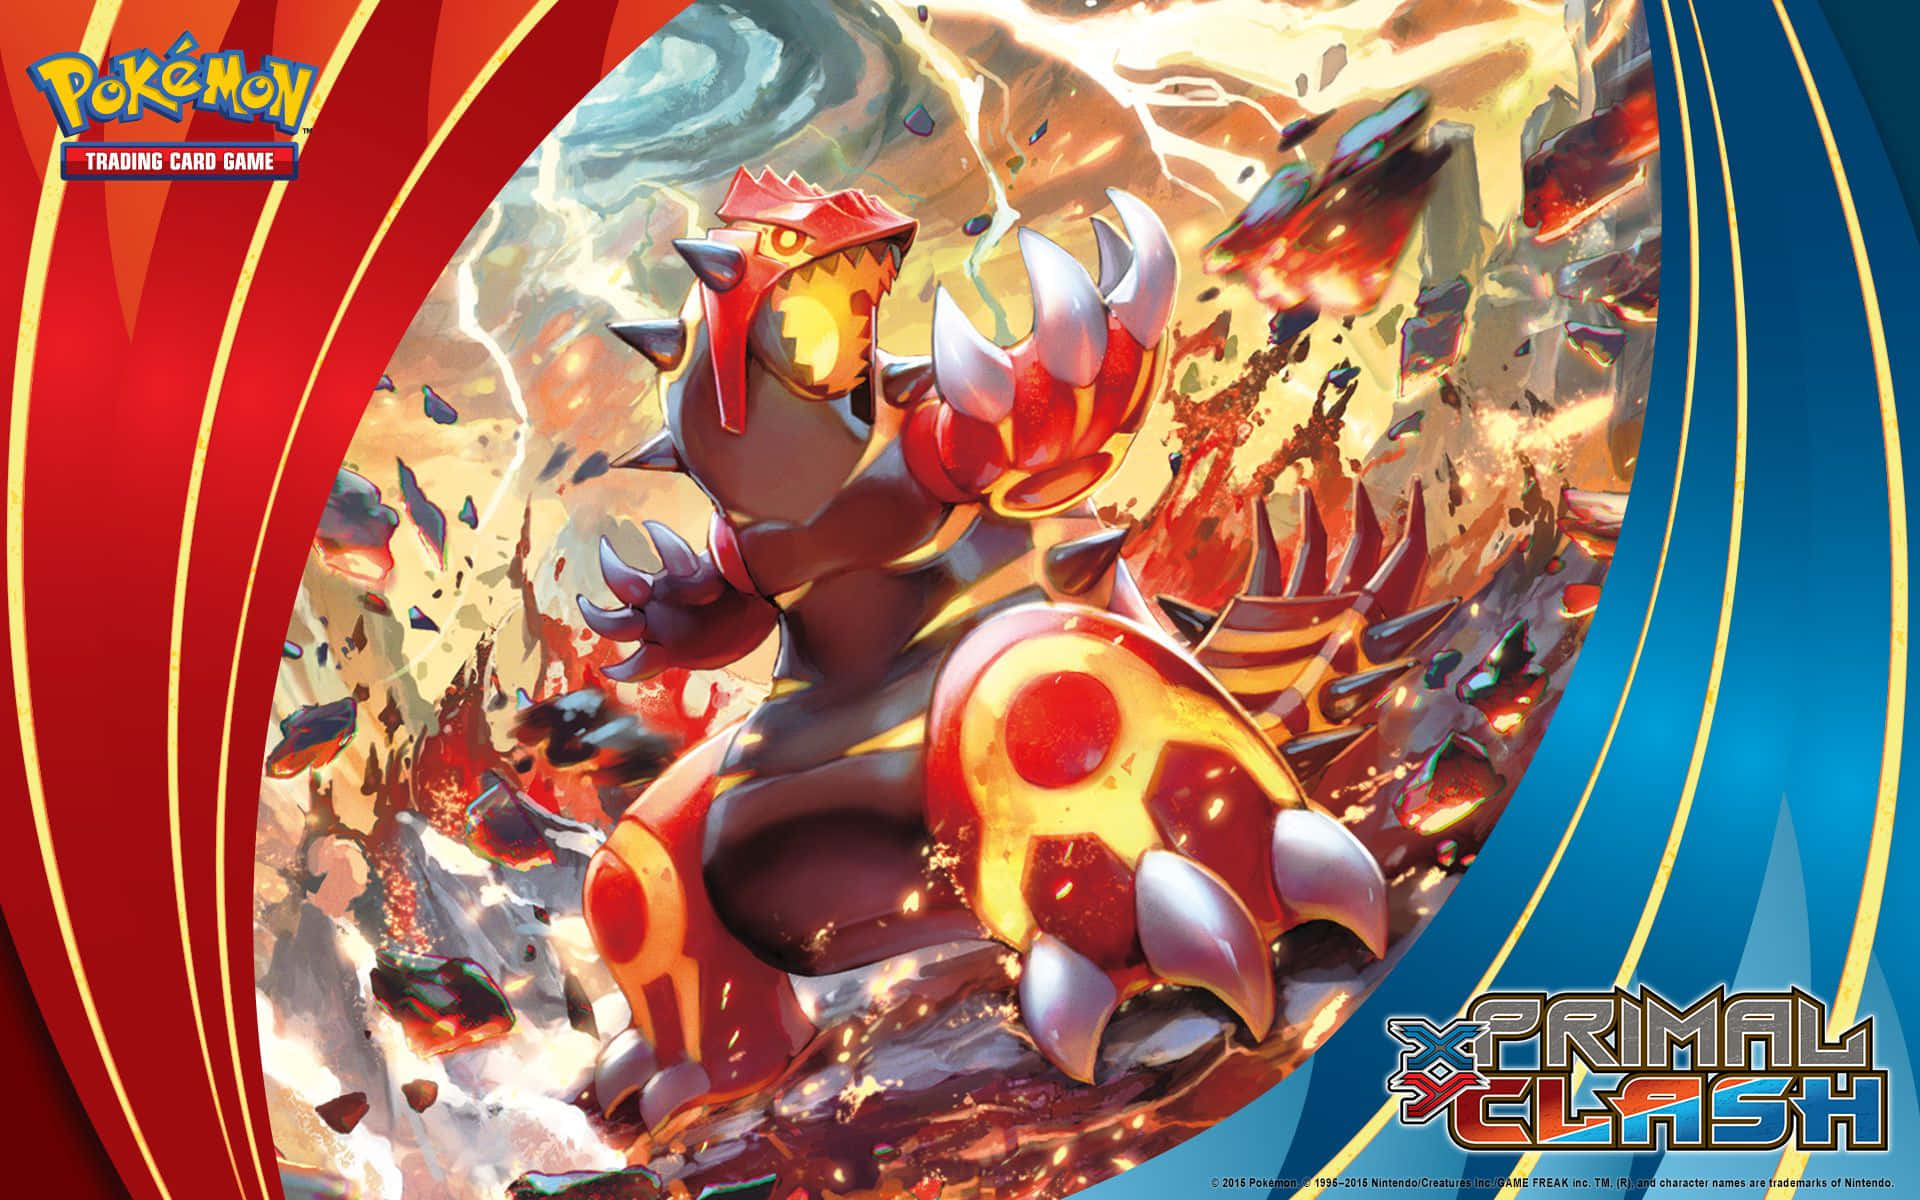 "Catch the latest Pokemon X&Y on the go!" Wallpaper